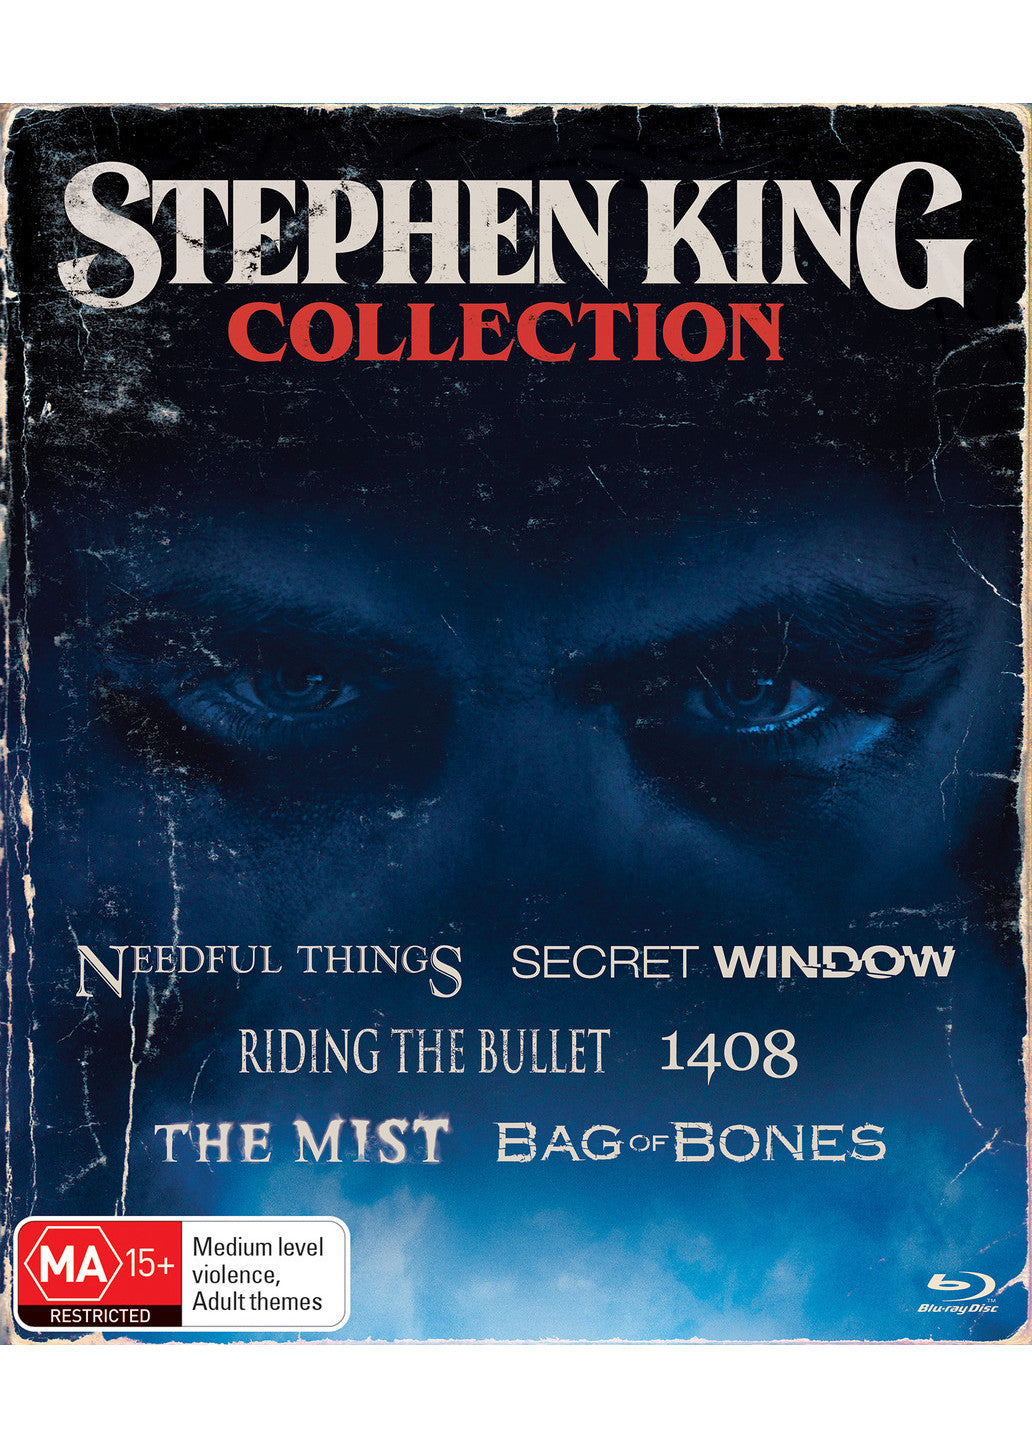 STEPHEN KING COLLECTION - LIMITED EDITION BLU-RAY